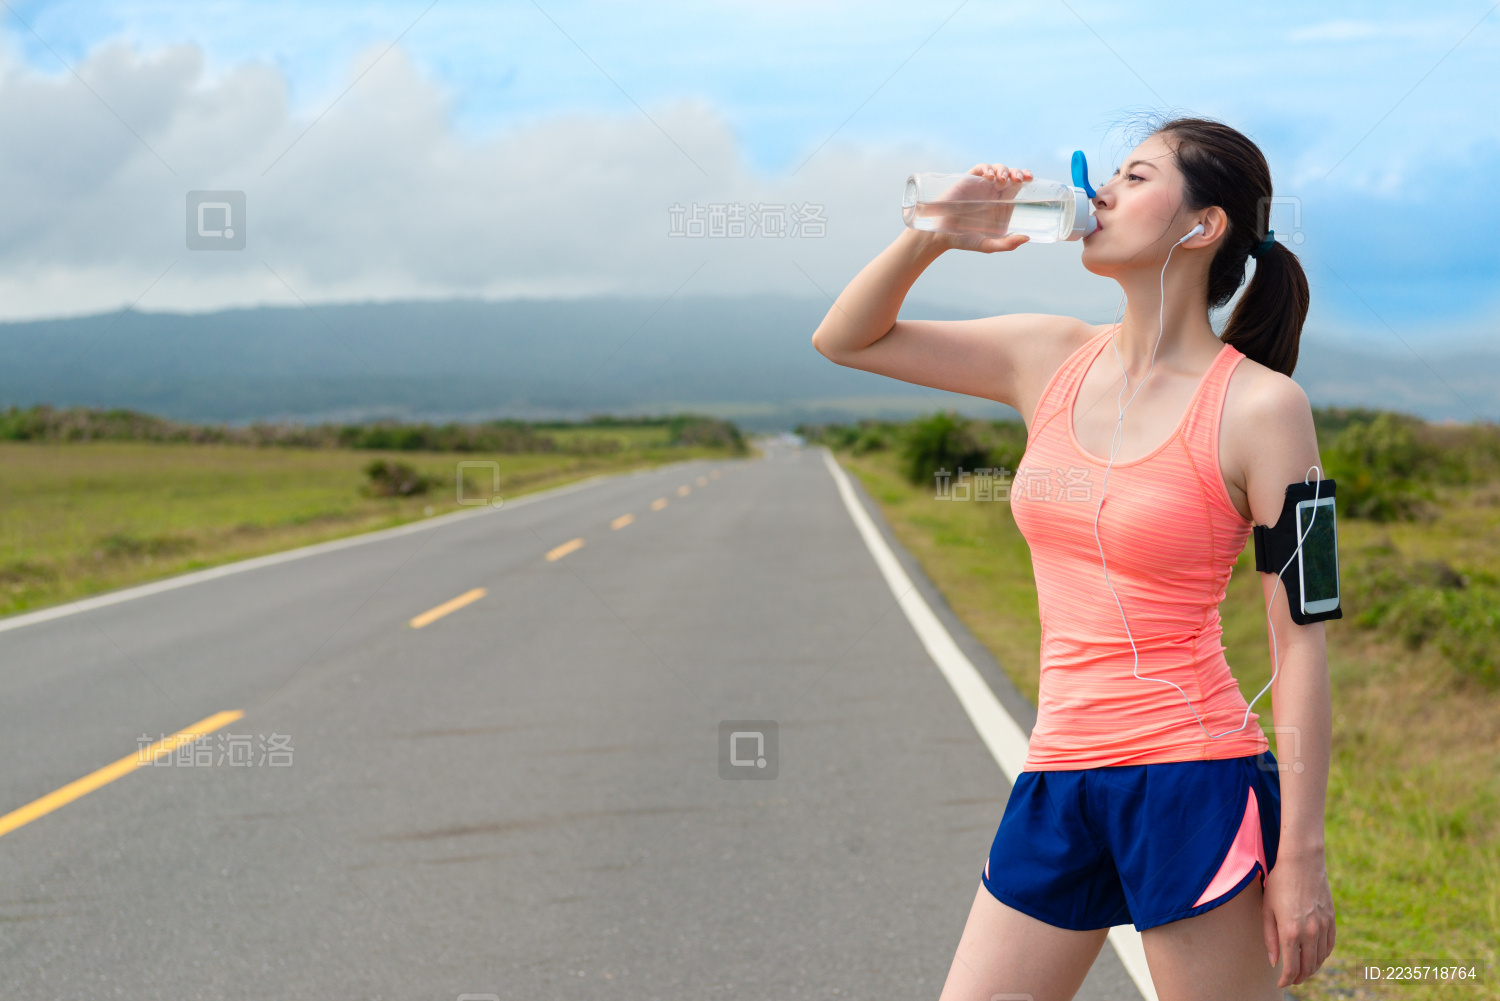 Man Drinking Refreshing Water after Workout at Beach. Drink Stock Image ...